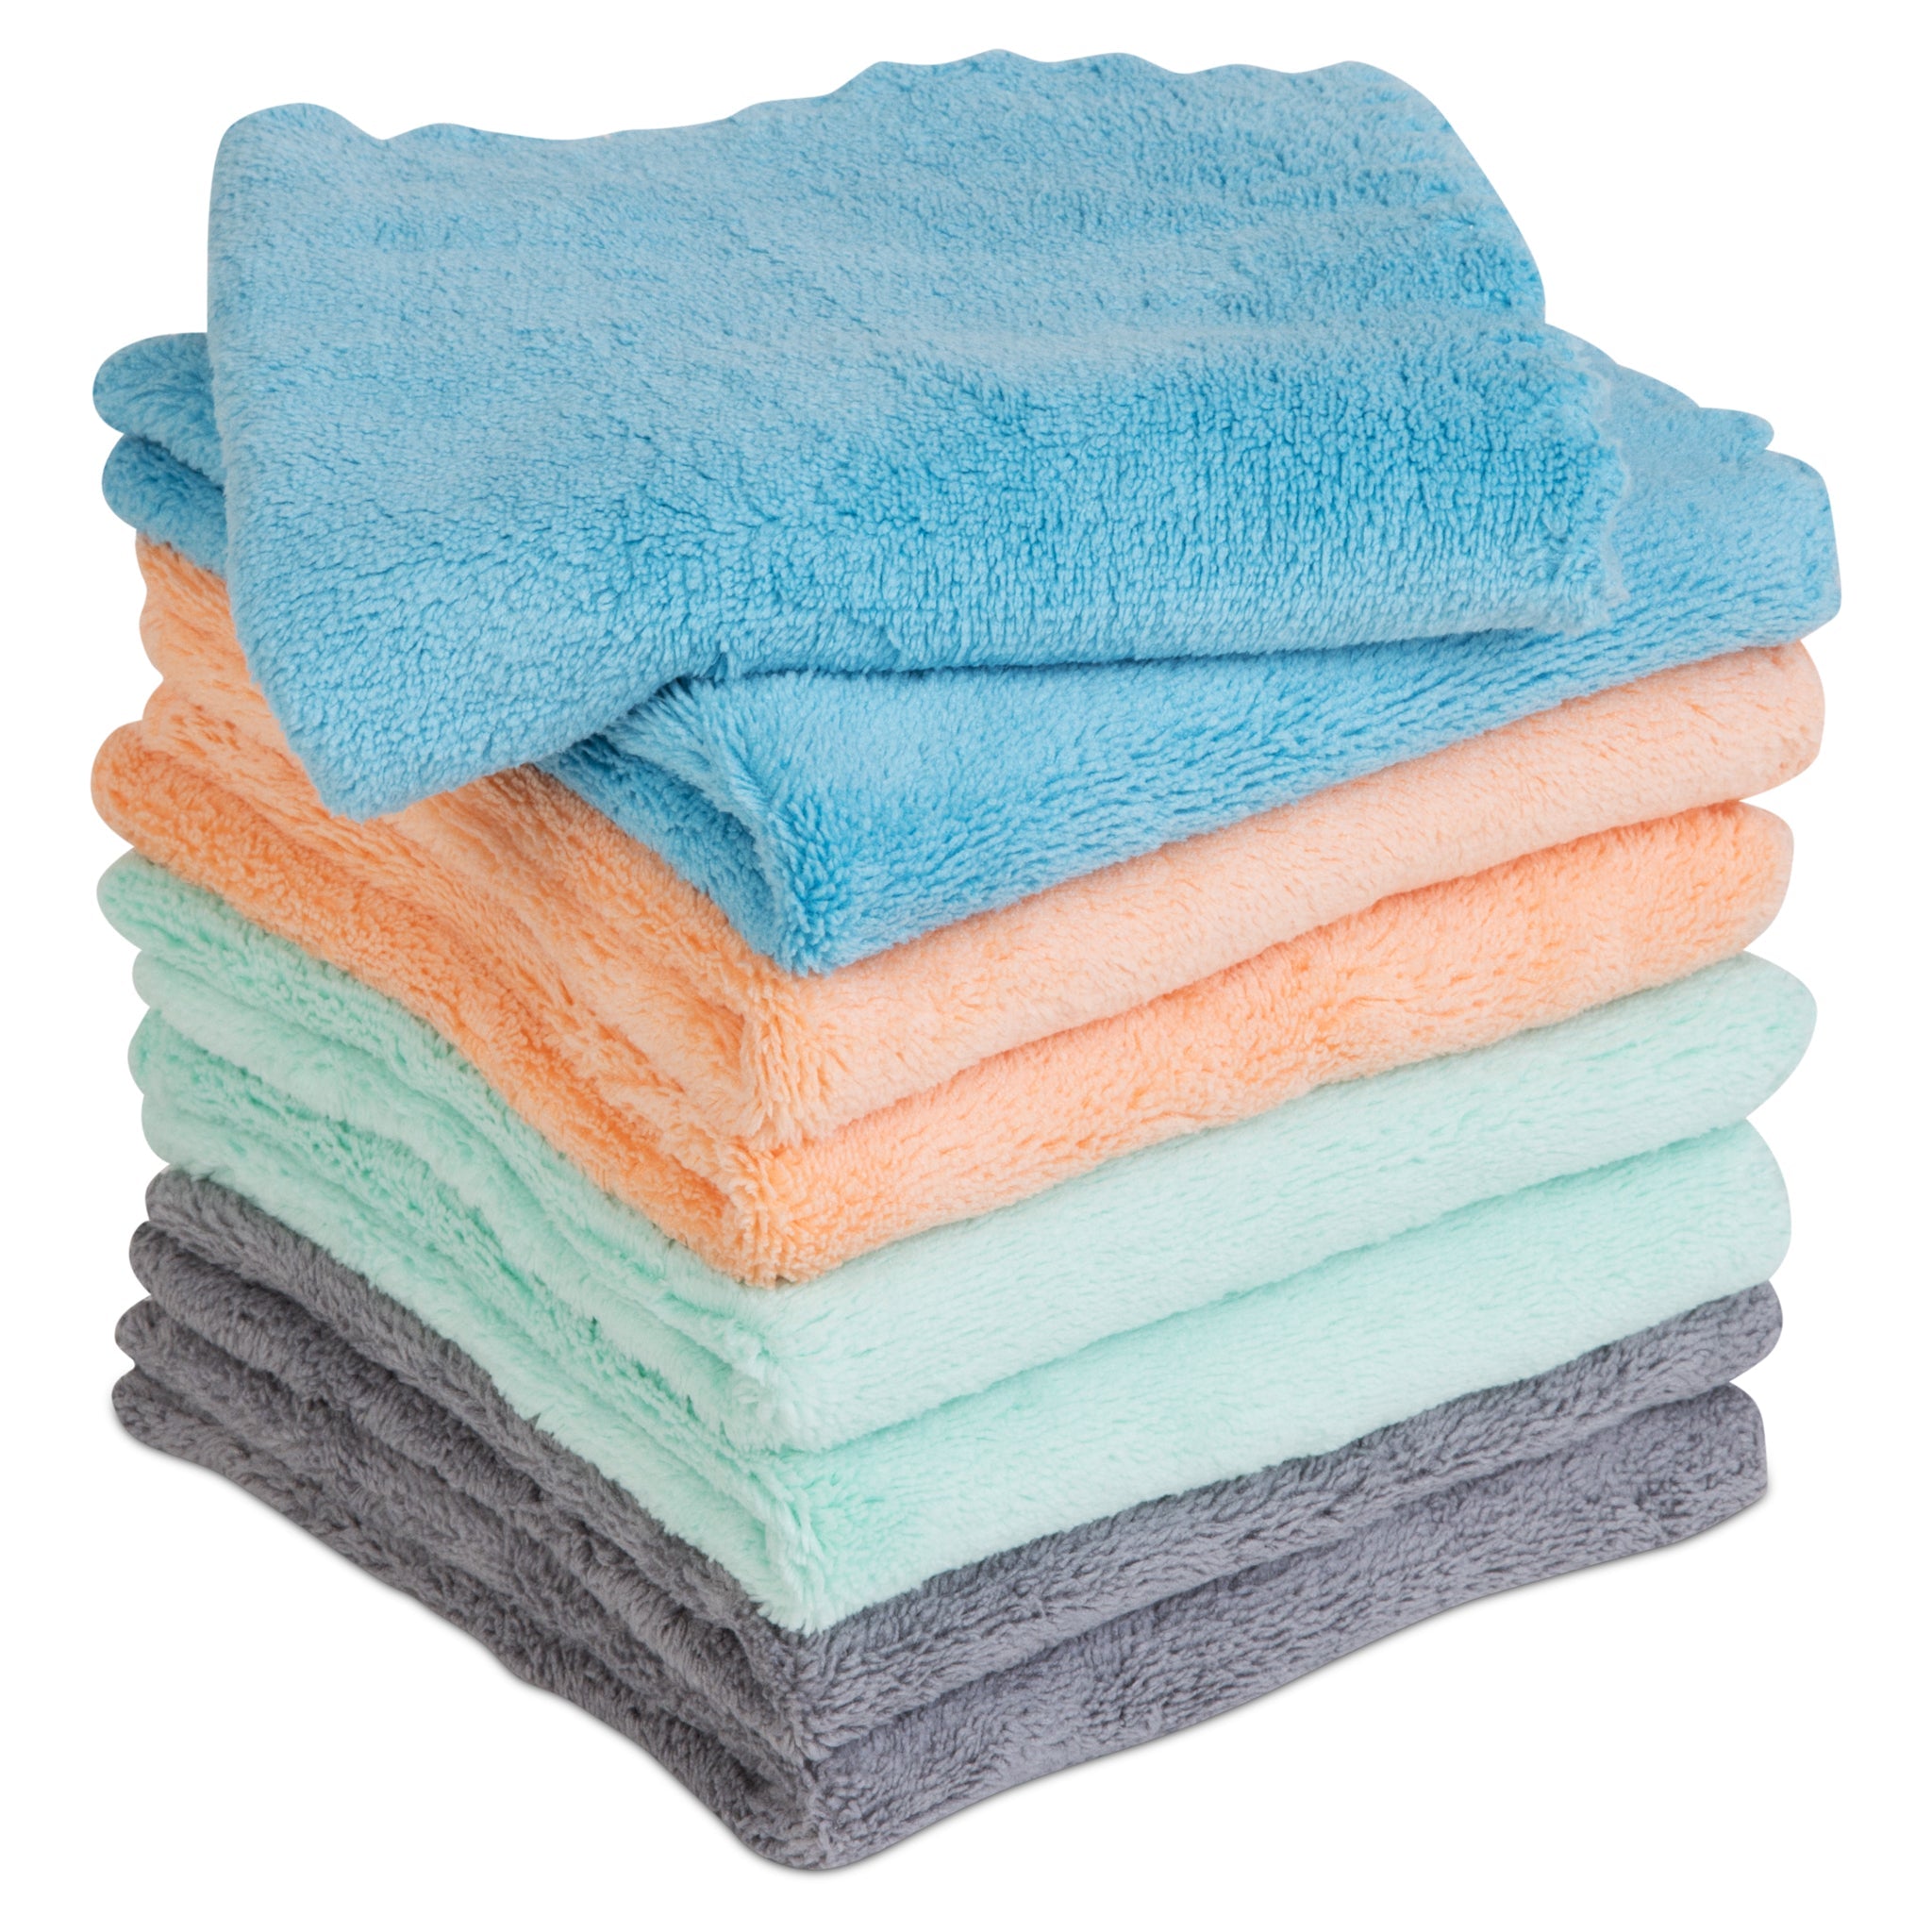 Towels Cleaning Kitchen, Cleaning Cloth Kitchen